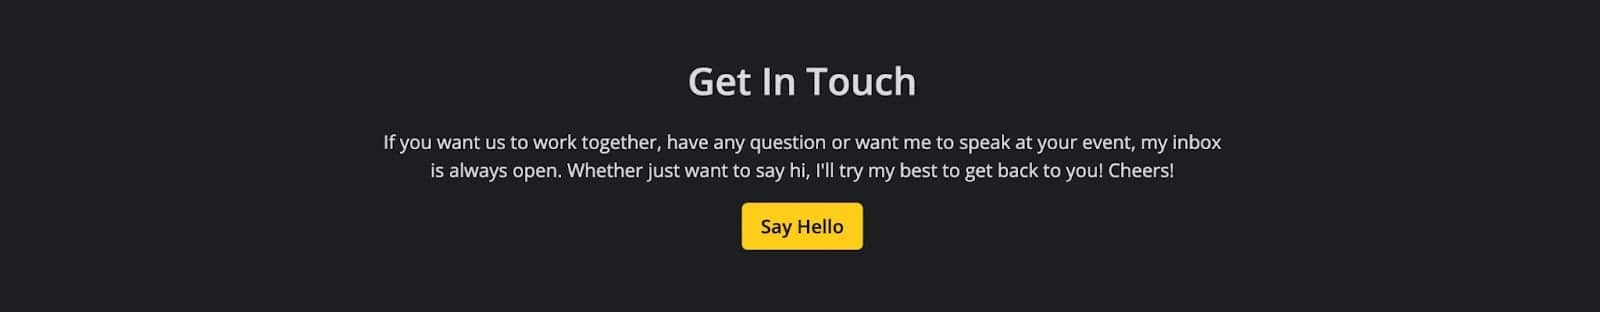 「Get In Touch」と題したコンポーネント